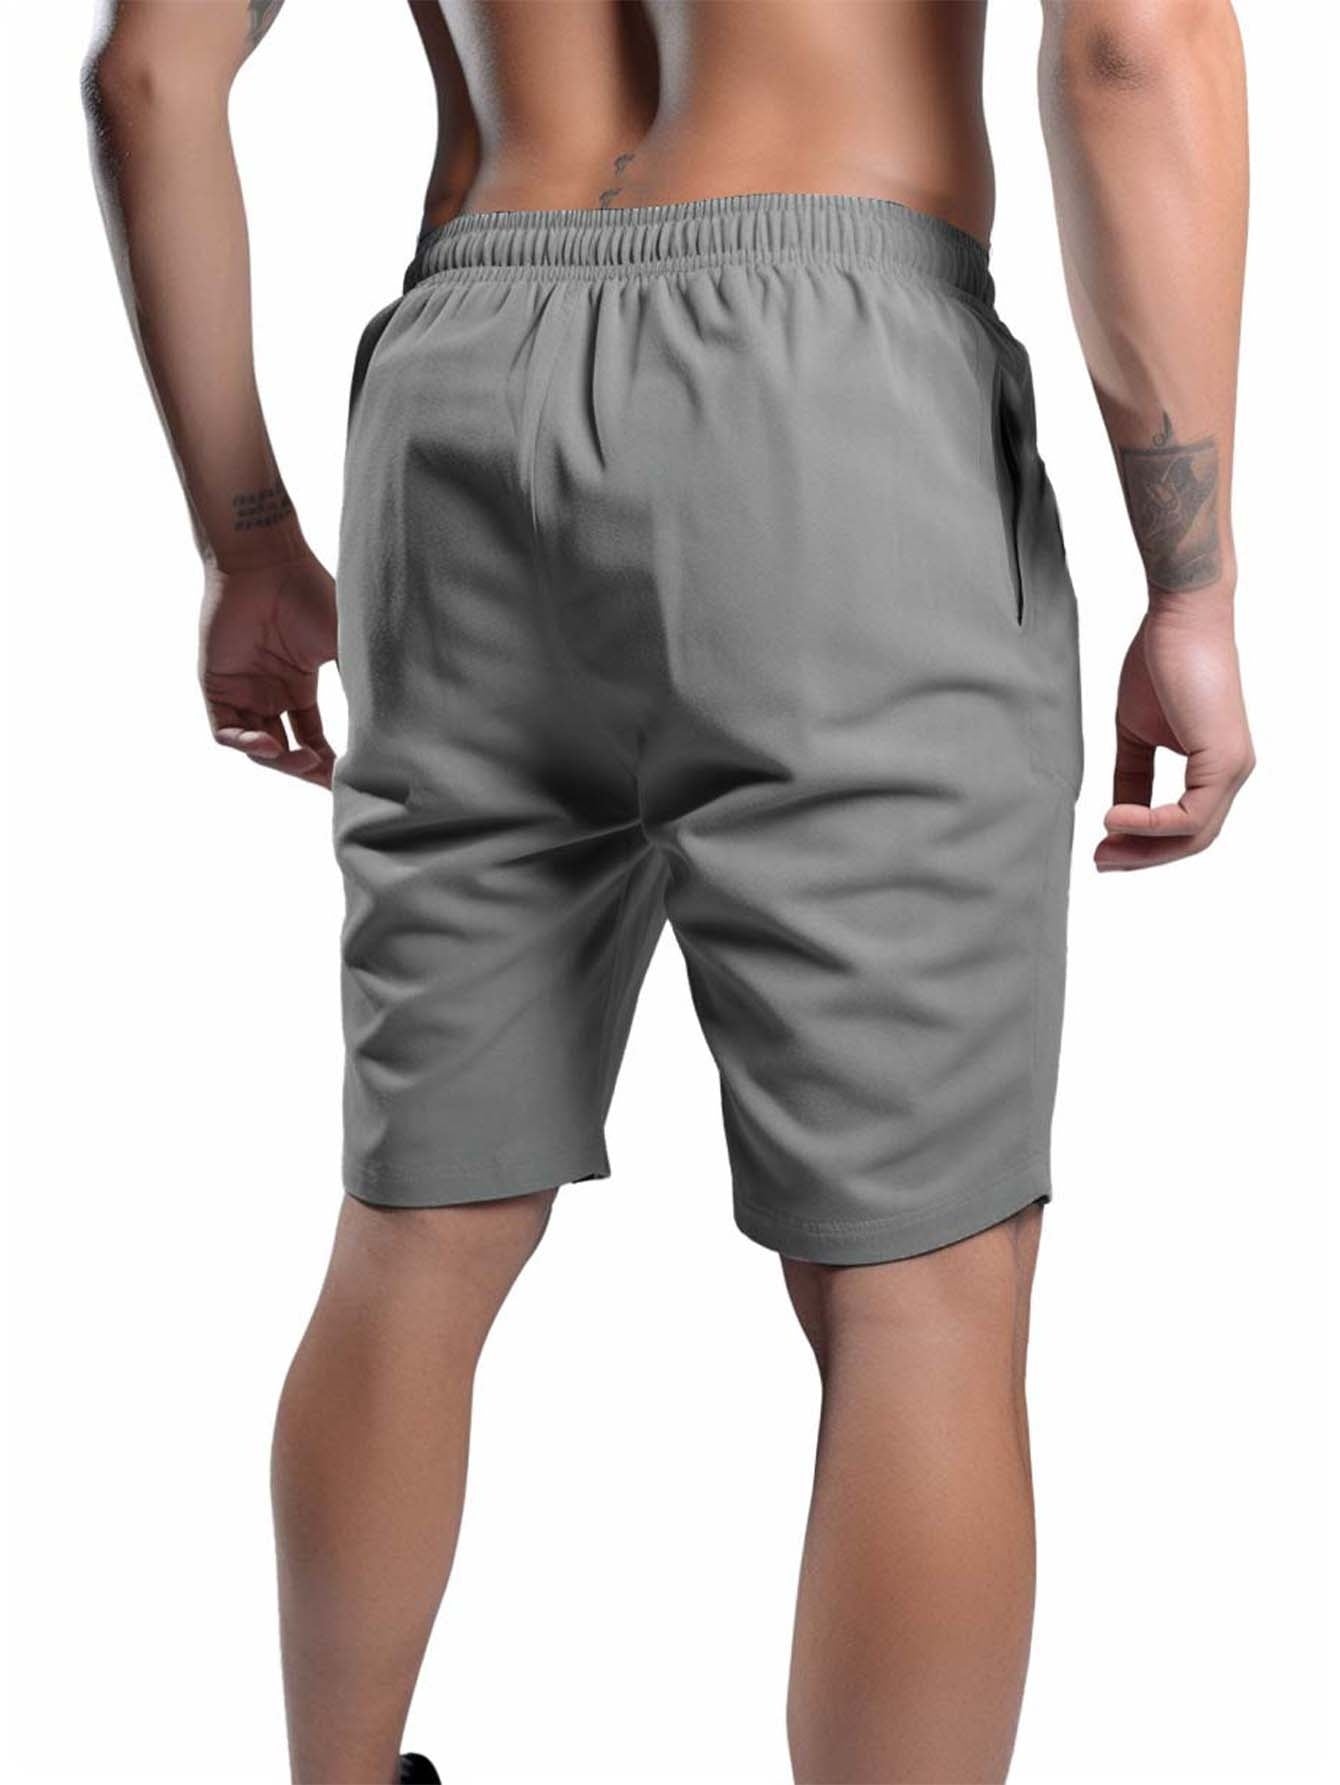 What God Knows About Me Is More Important Plus Size Men's Christian Shorts claimedbygoddesigns